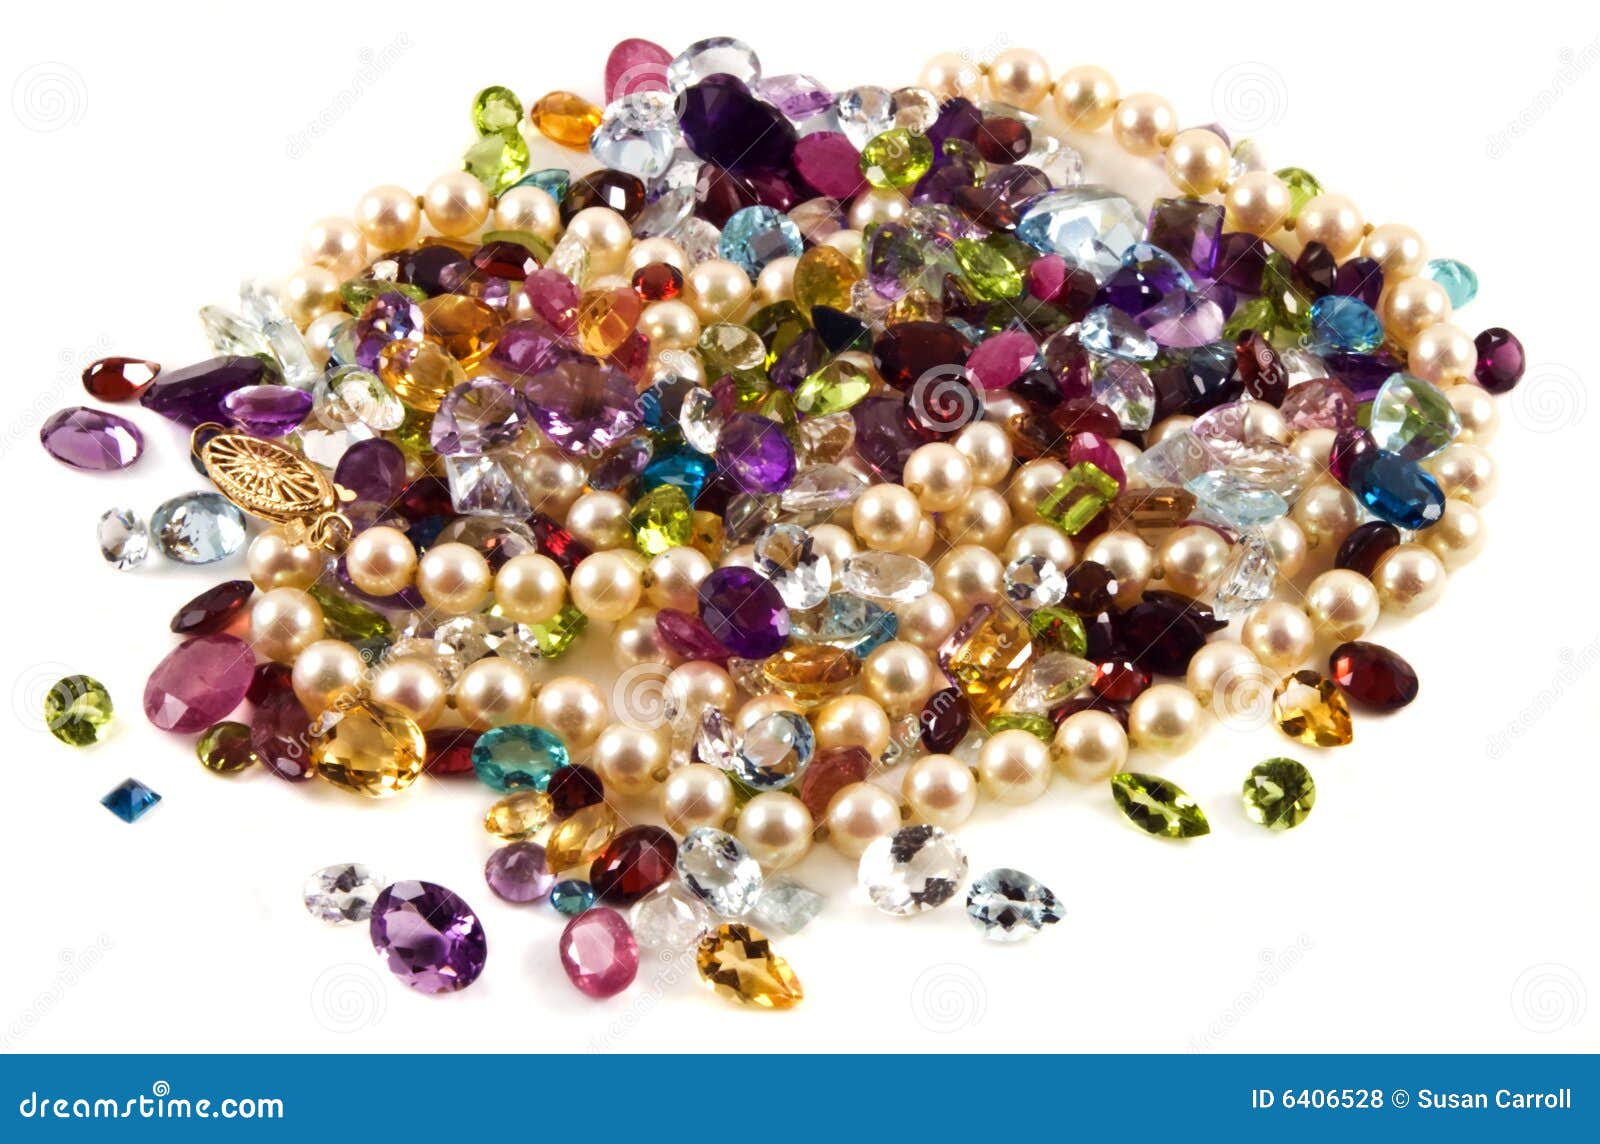 faceted gemstones with pearls